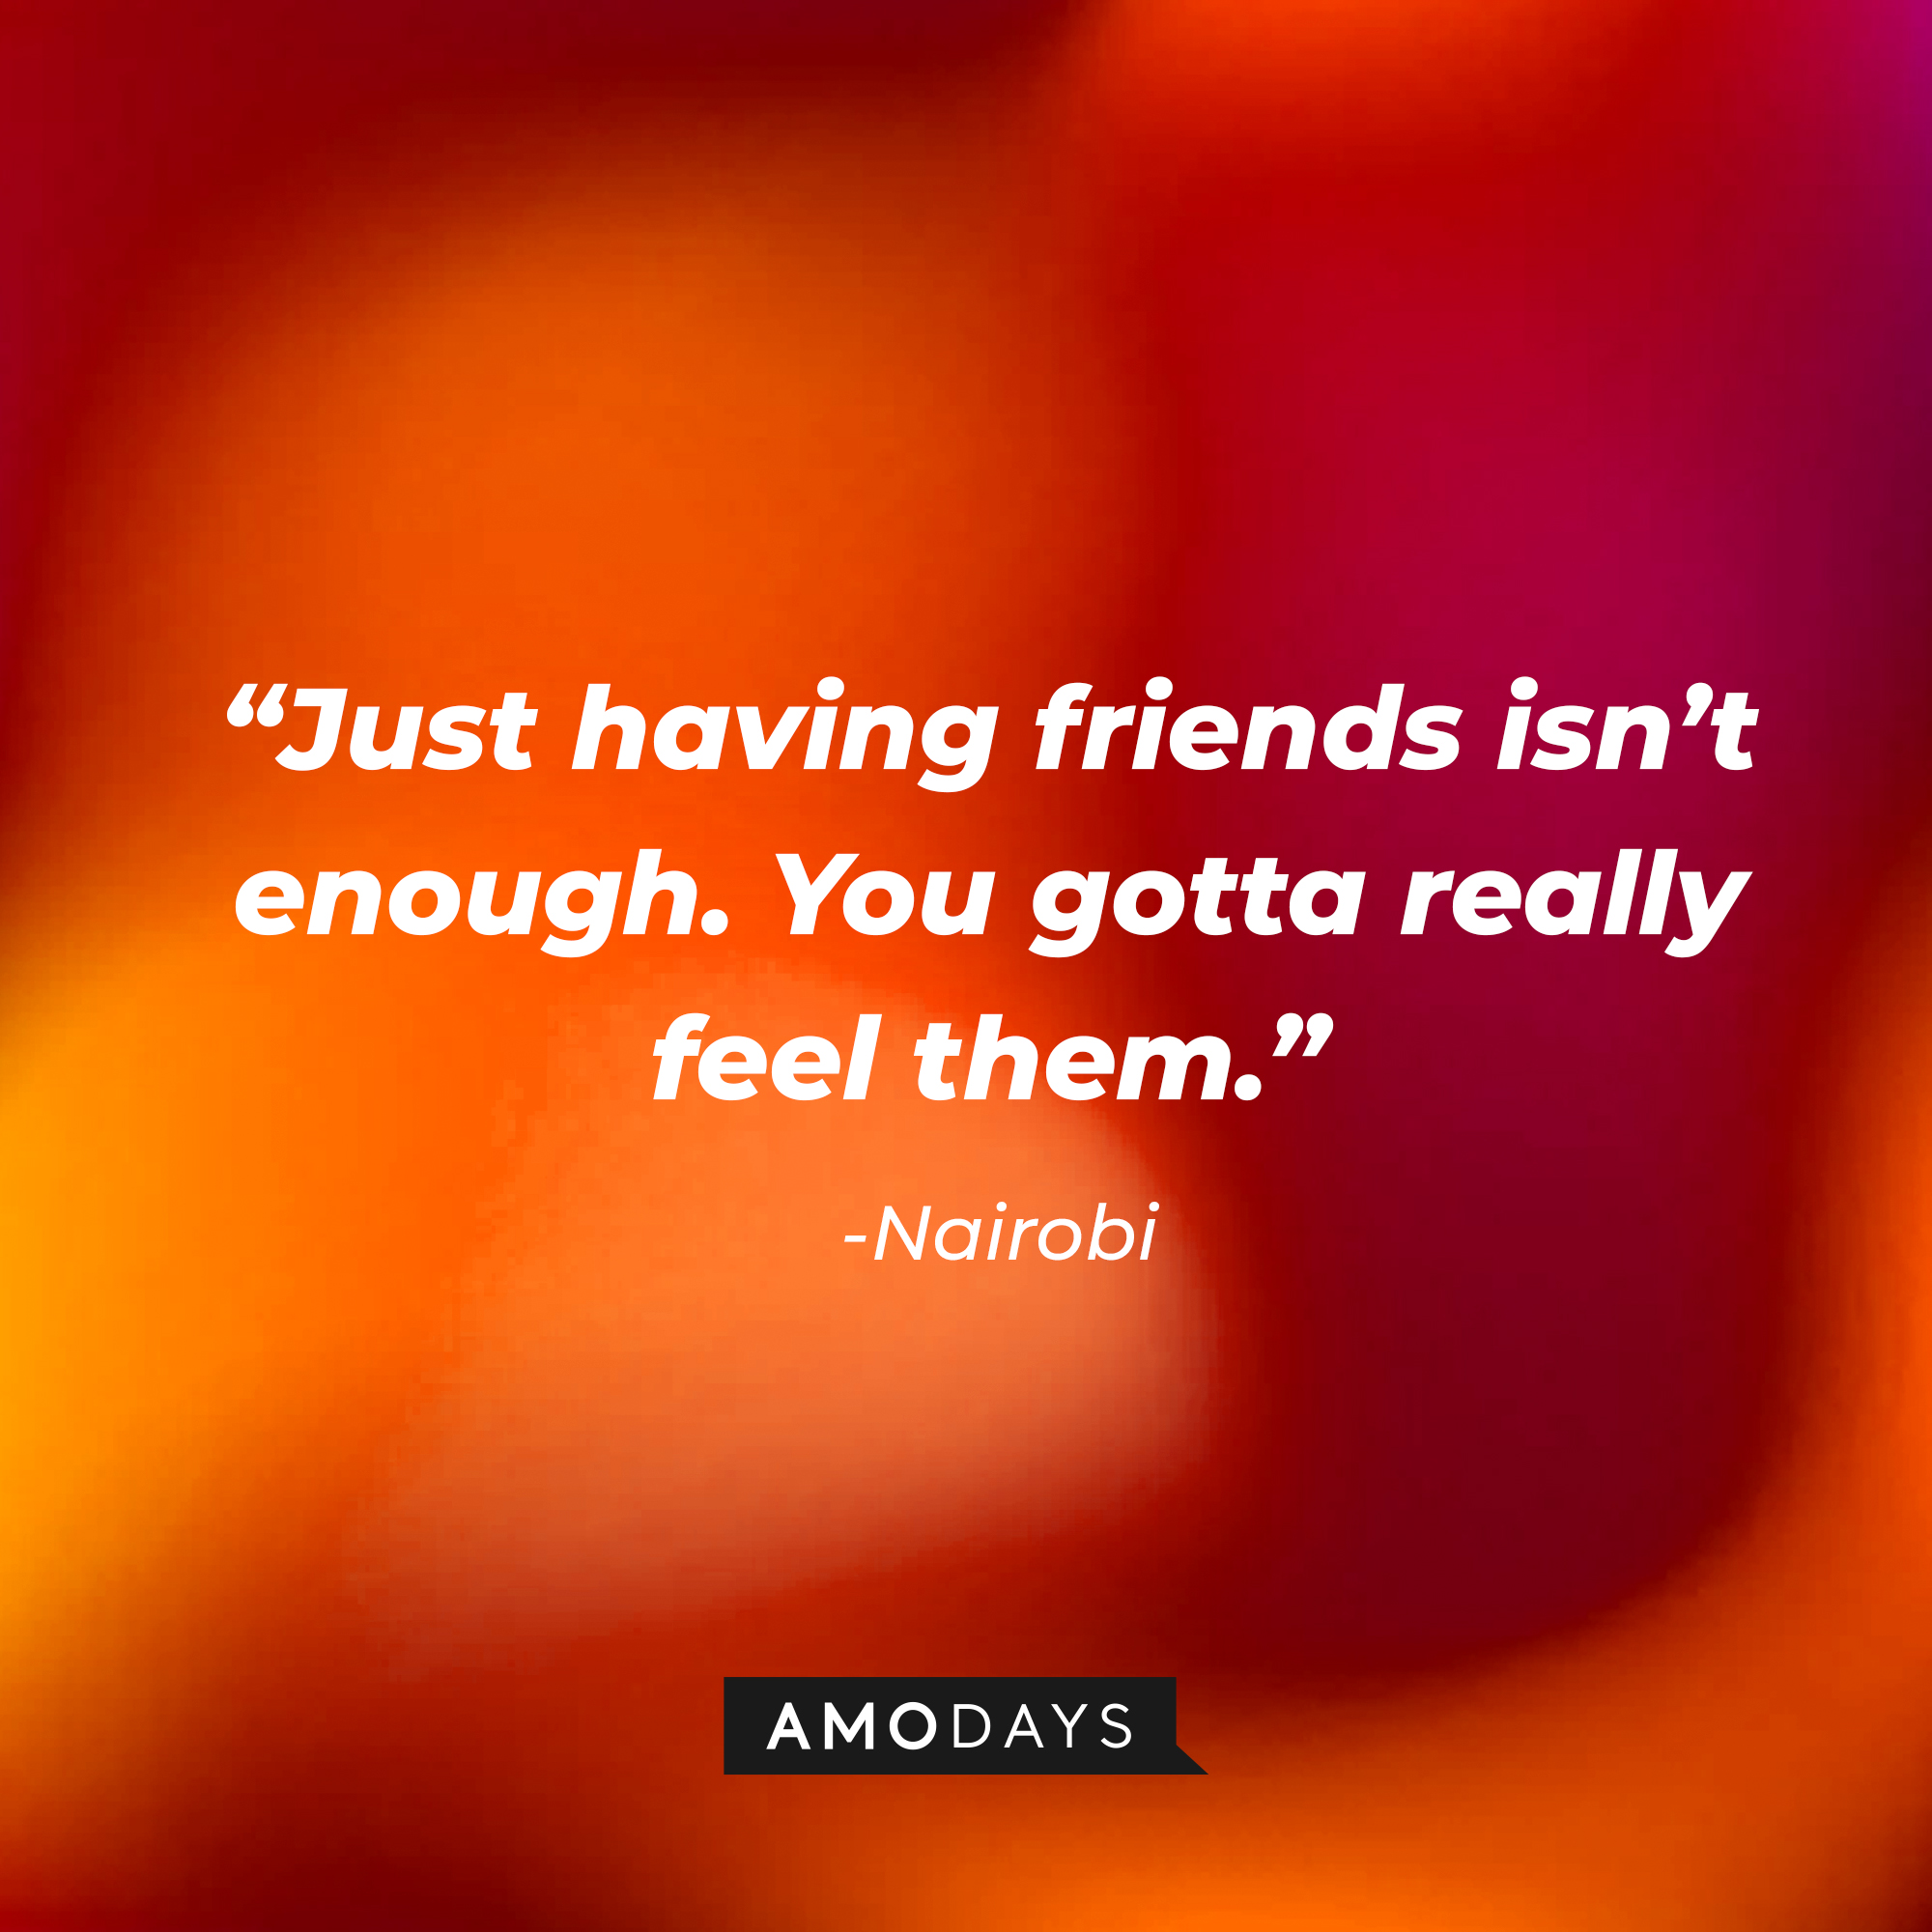 Nairobi’s  quote: “Just having friends isn’t enough. You gotta really feel them.” | Source: AmoDays